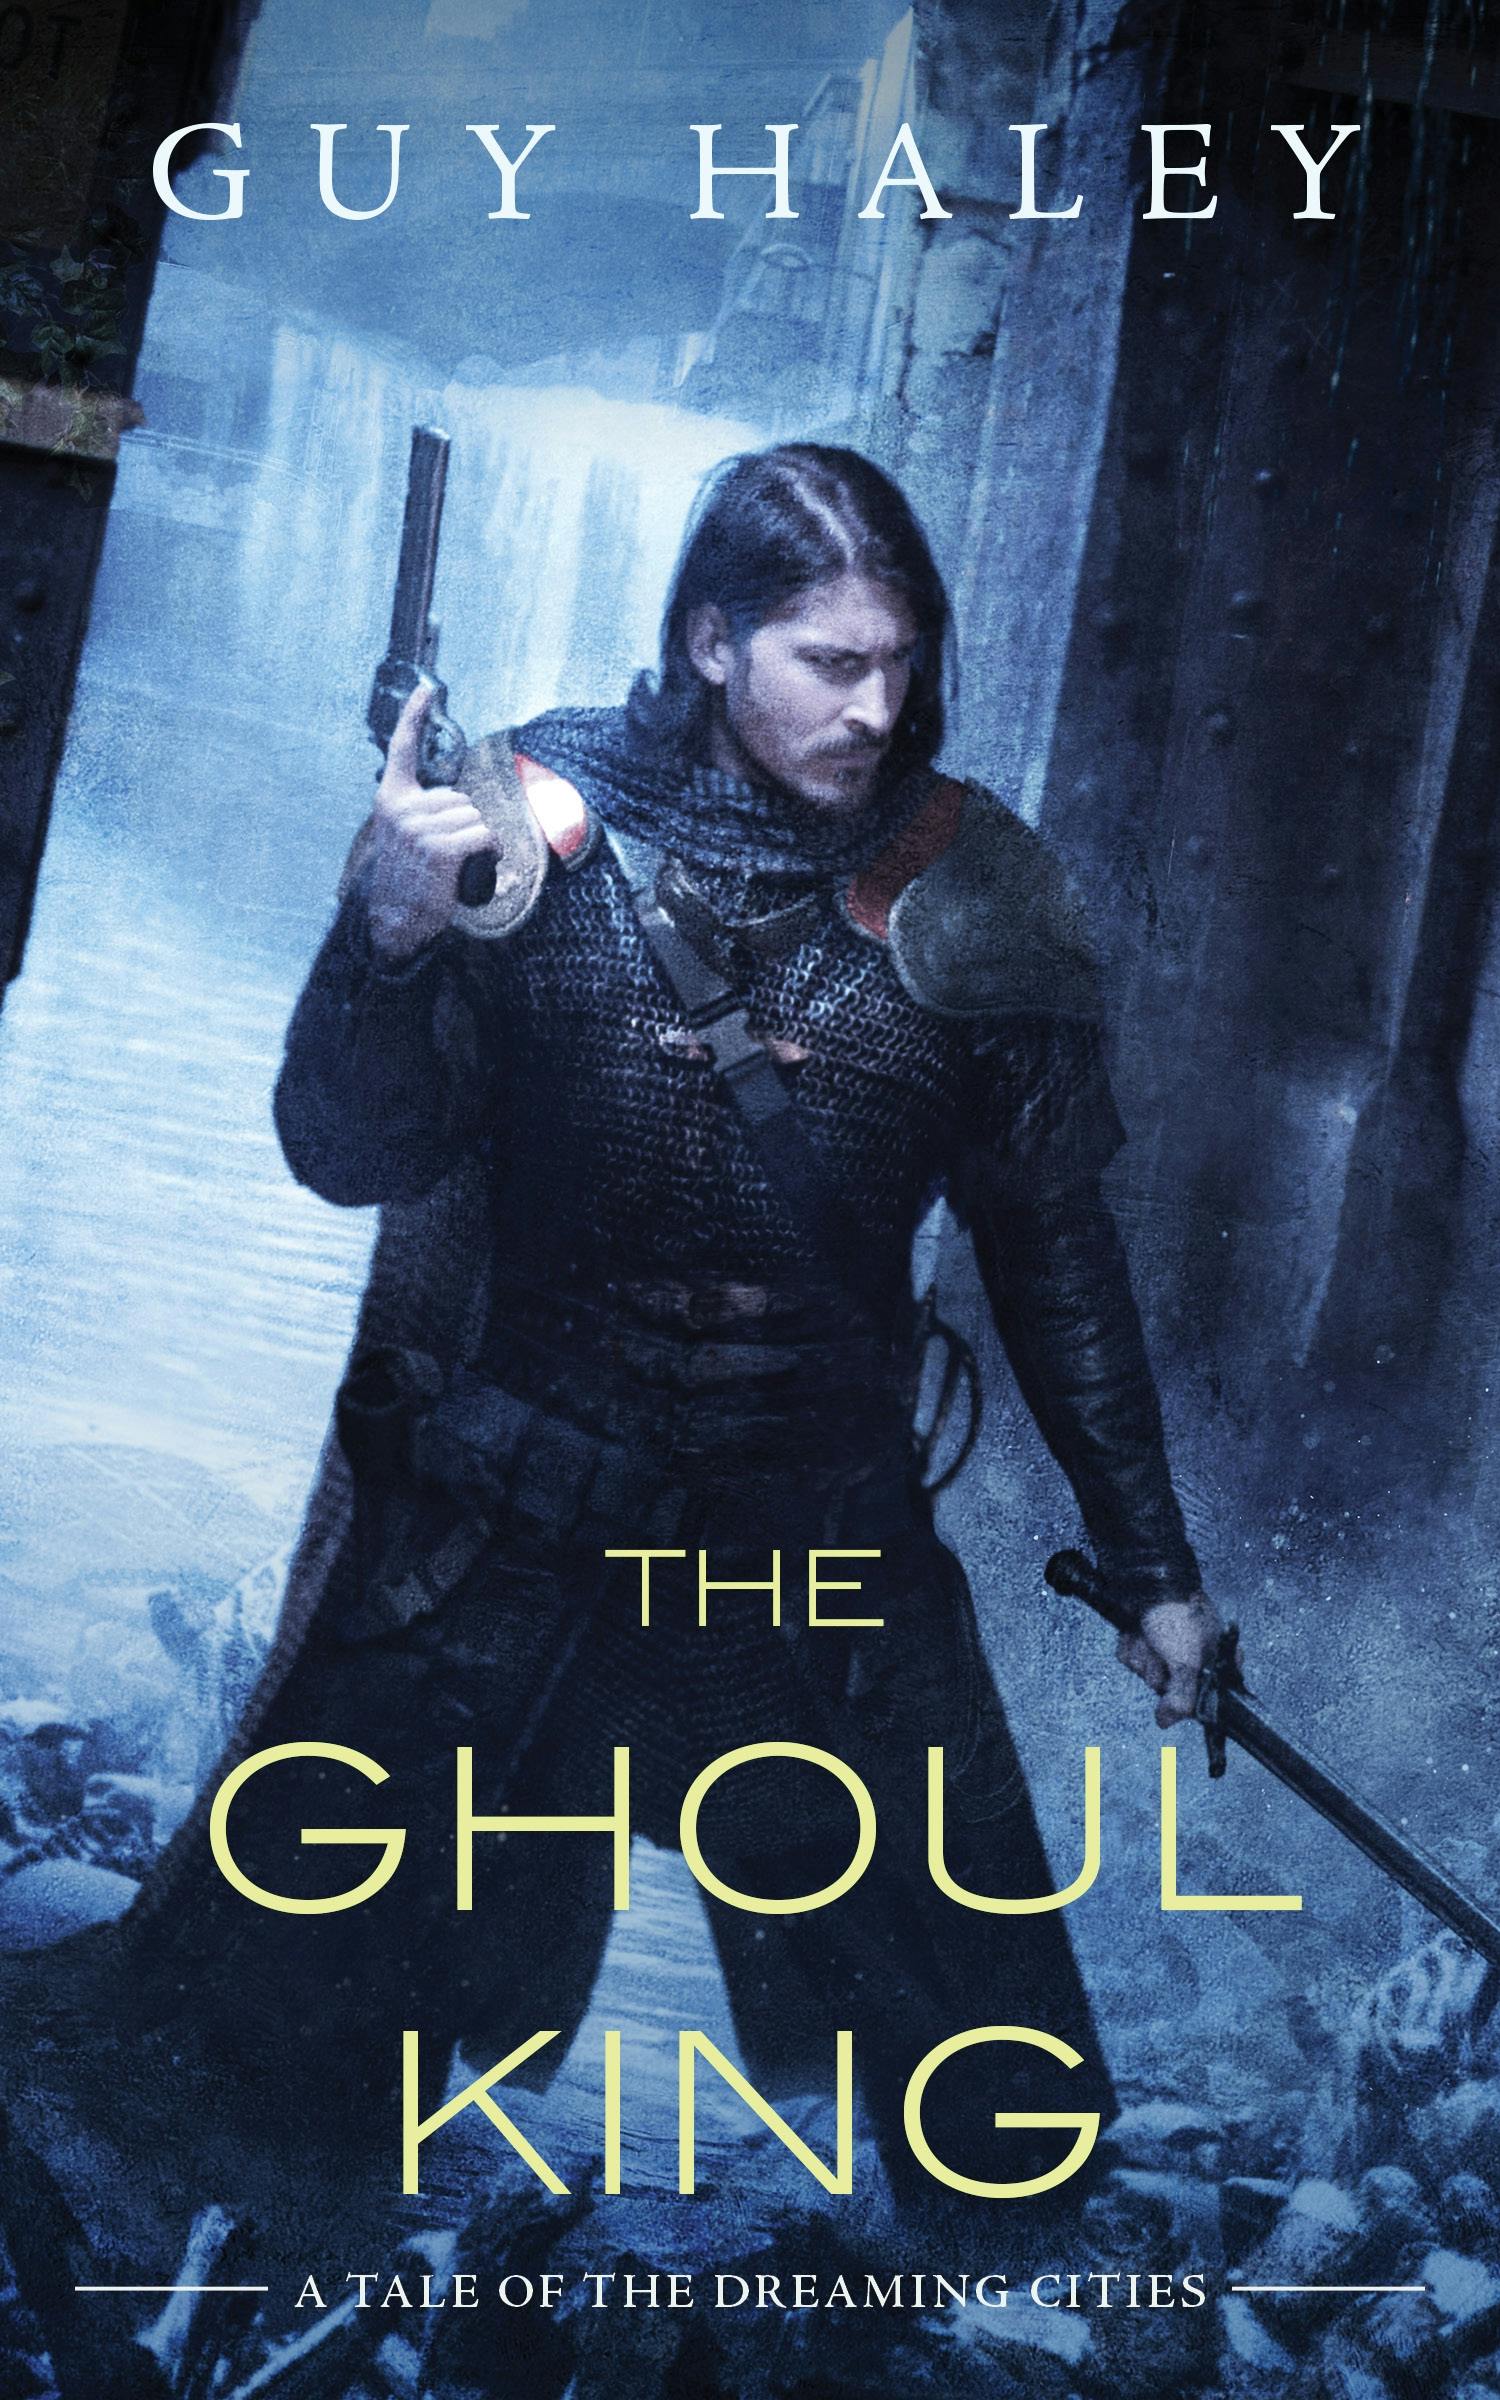 Cover for the book titled as: The Ghoul King